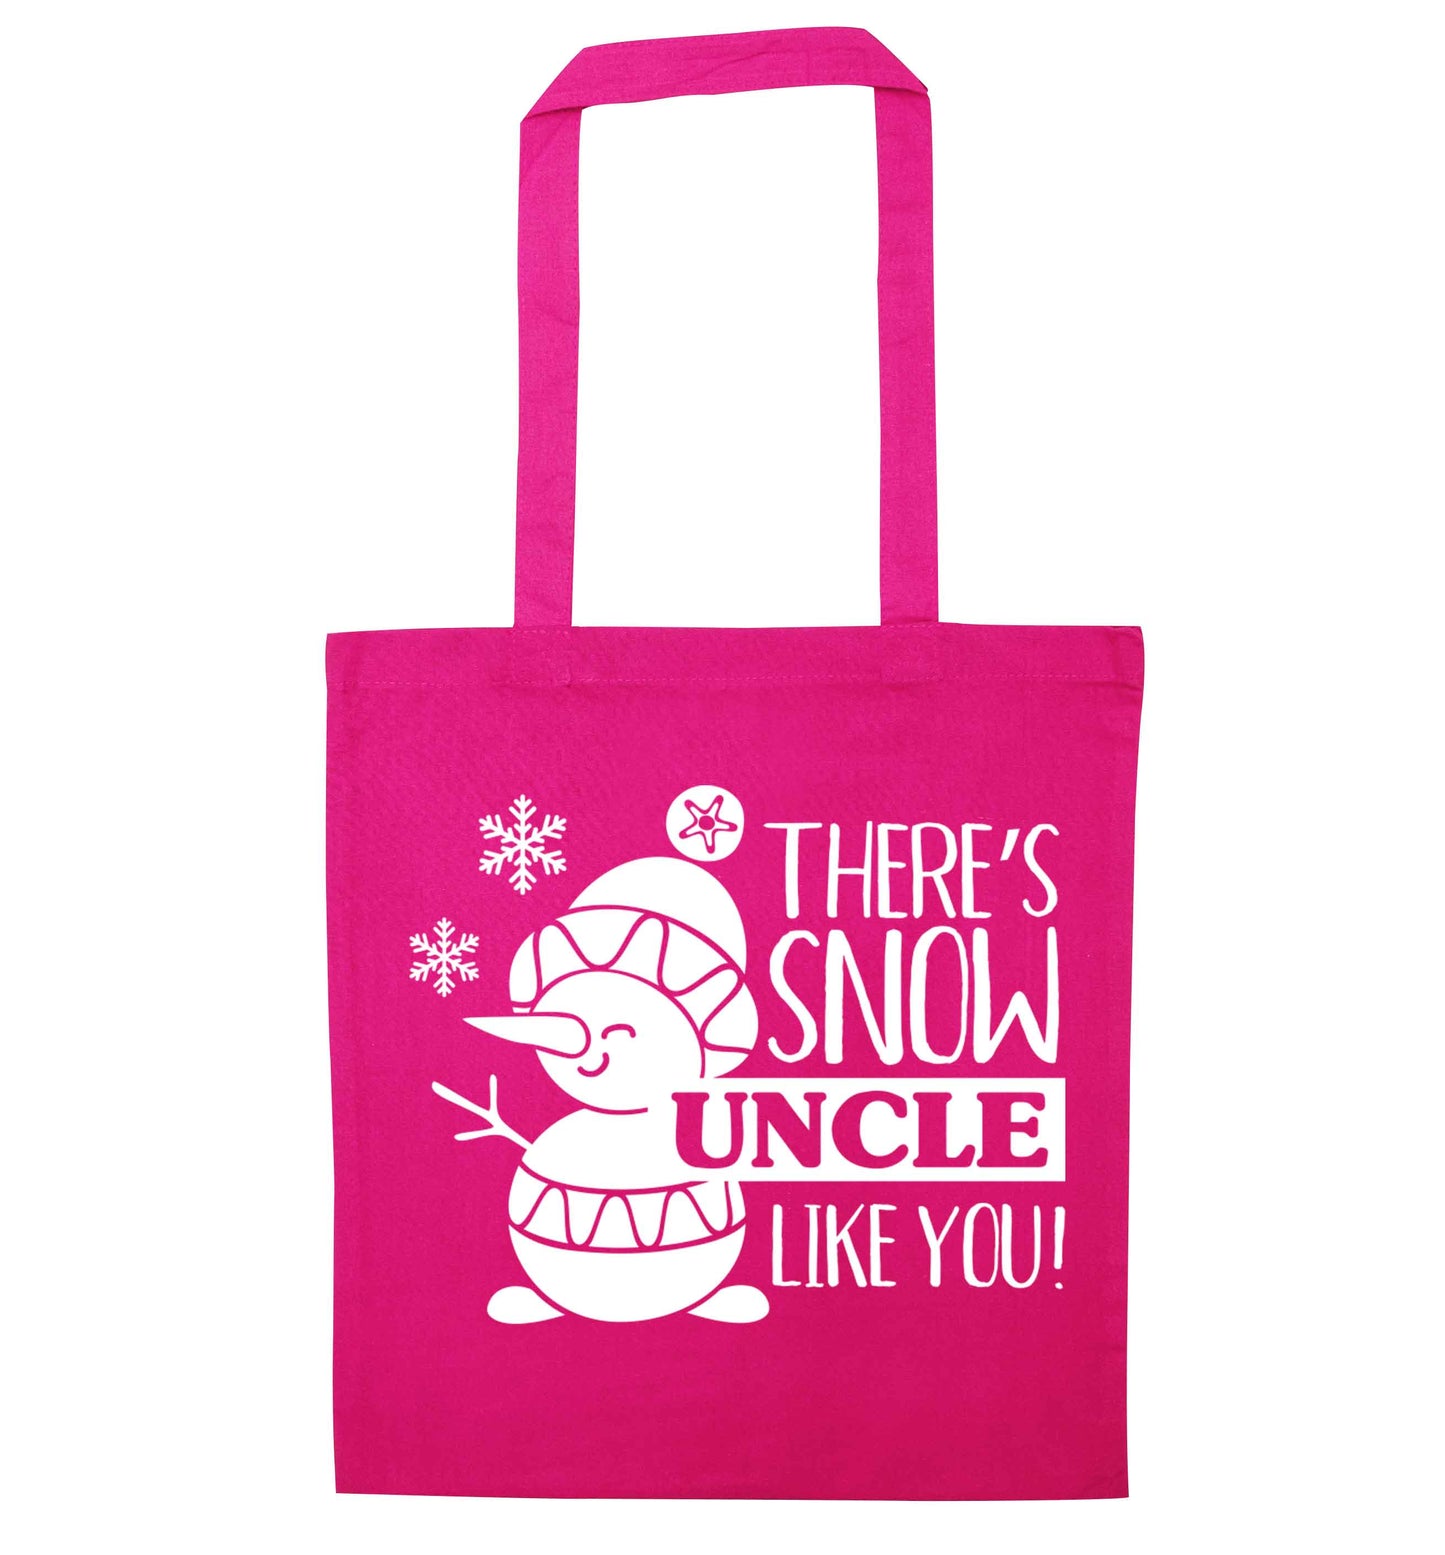 There's snow uncle like you pink tote bag